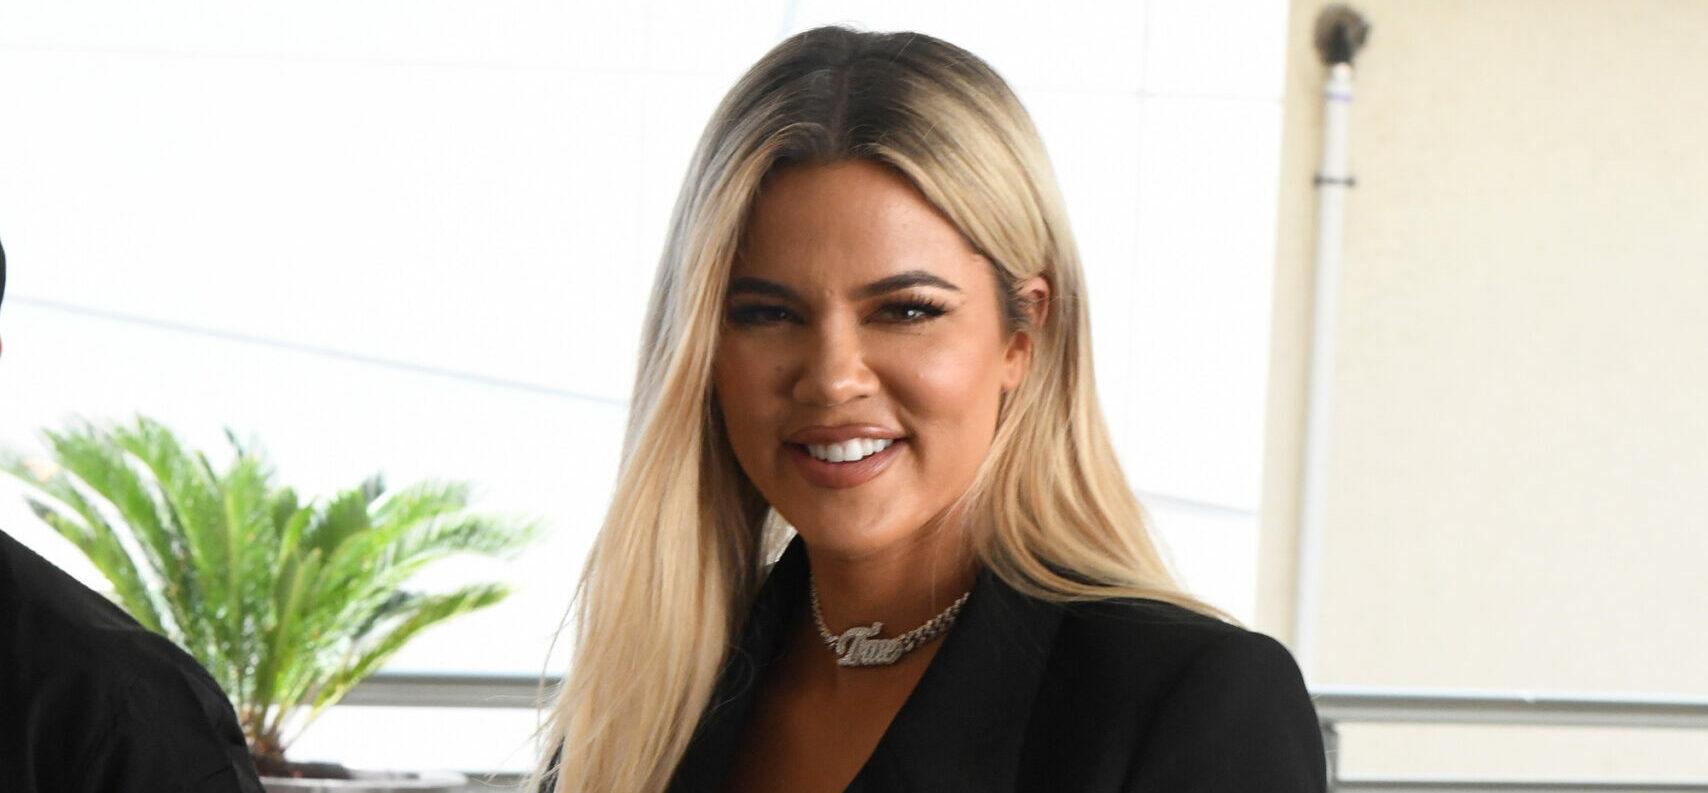 Khloe Kardashian shows off her legs in a tiny minidress while rocking a pink diamond ring from ex-boyfriend Tristan Thompson at a mall in Miami